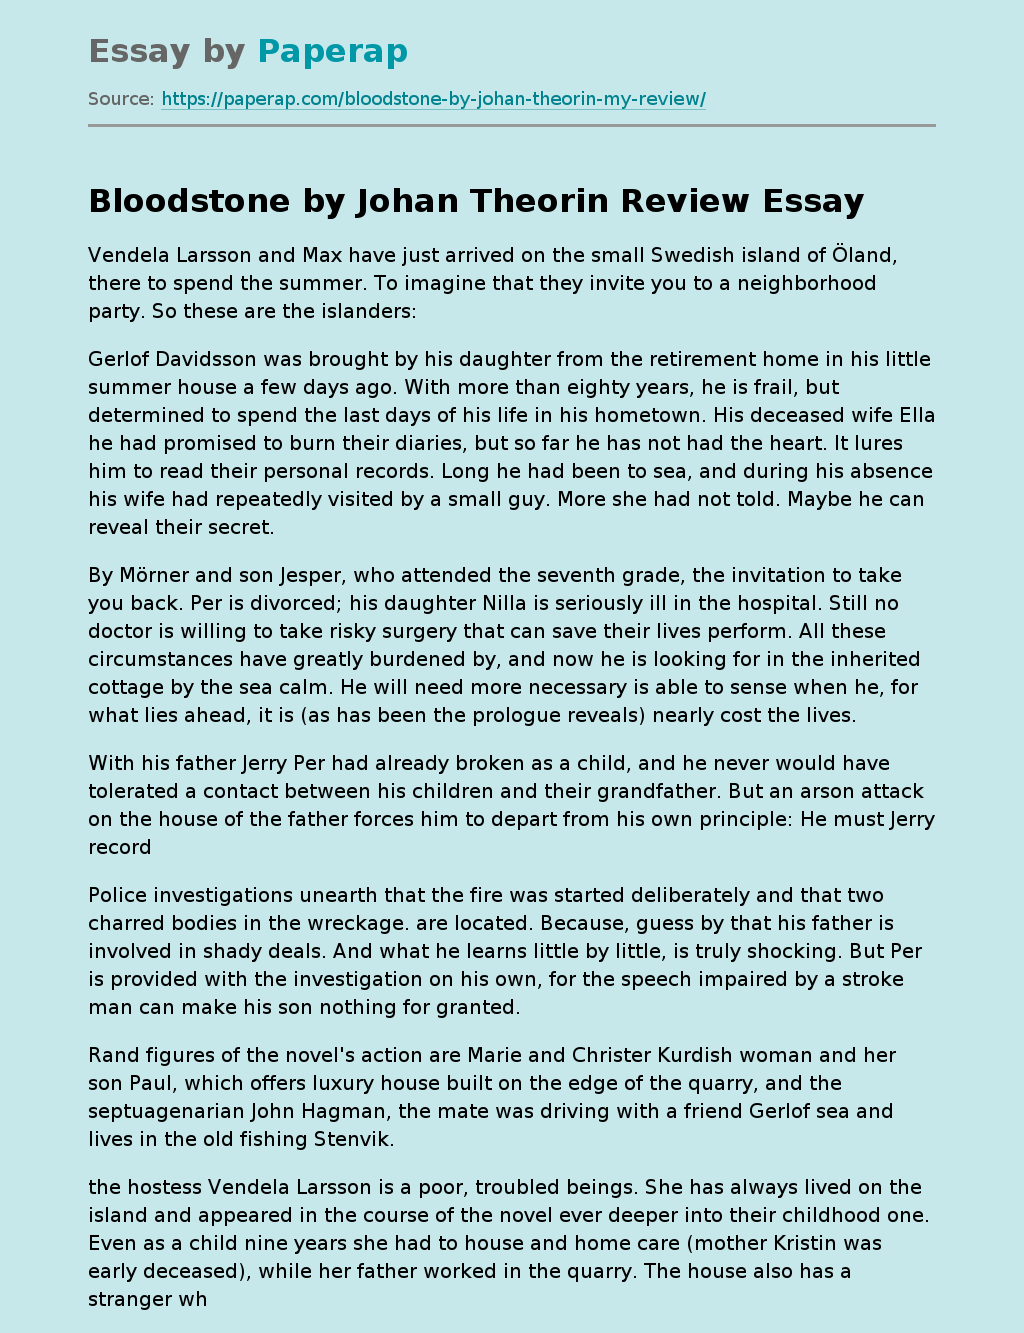 Bloodstone by Johan Theorin Review